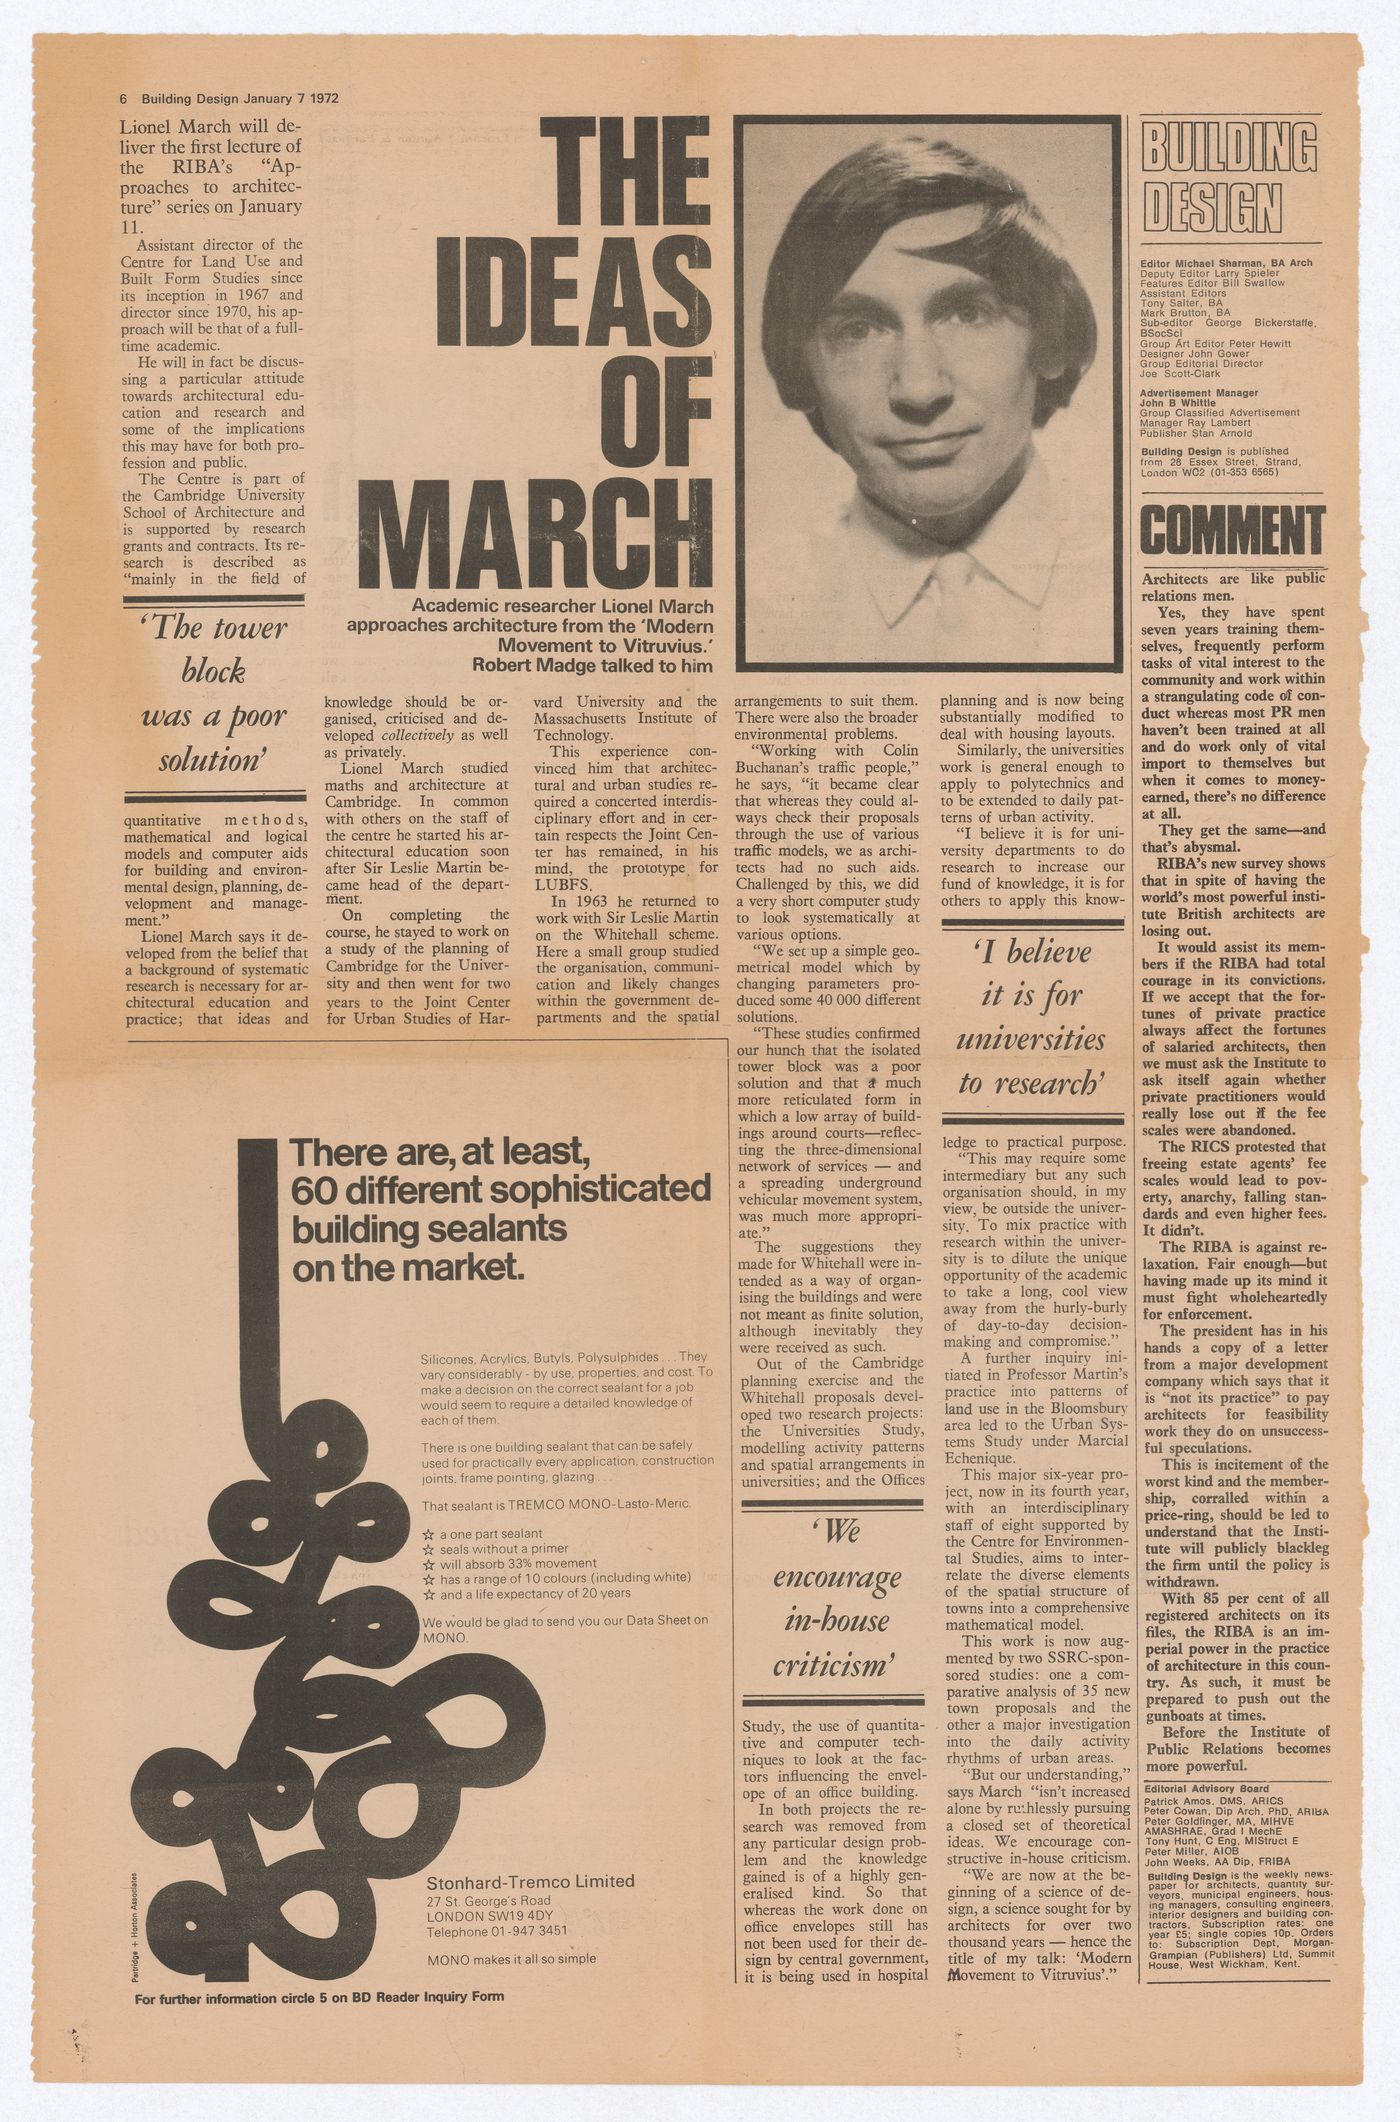 "The ideas of March" newspaper article from Building Design